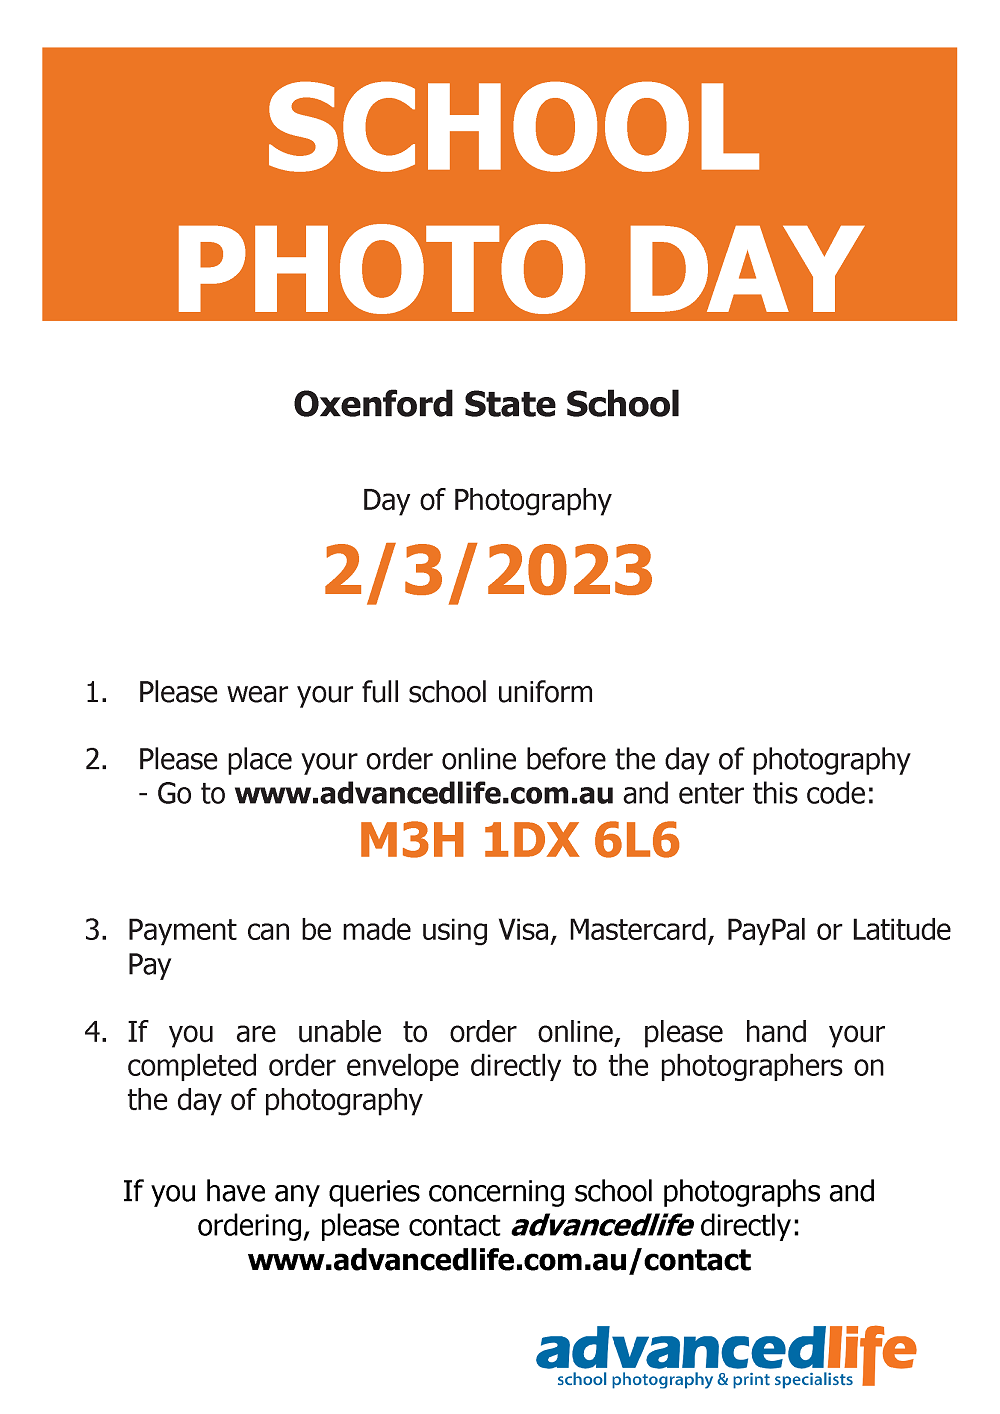 School Photo Day Poster_Oxenford State School.png